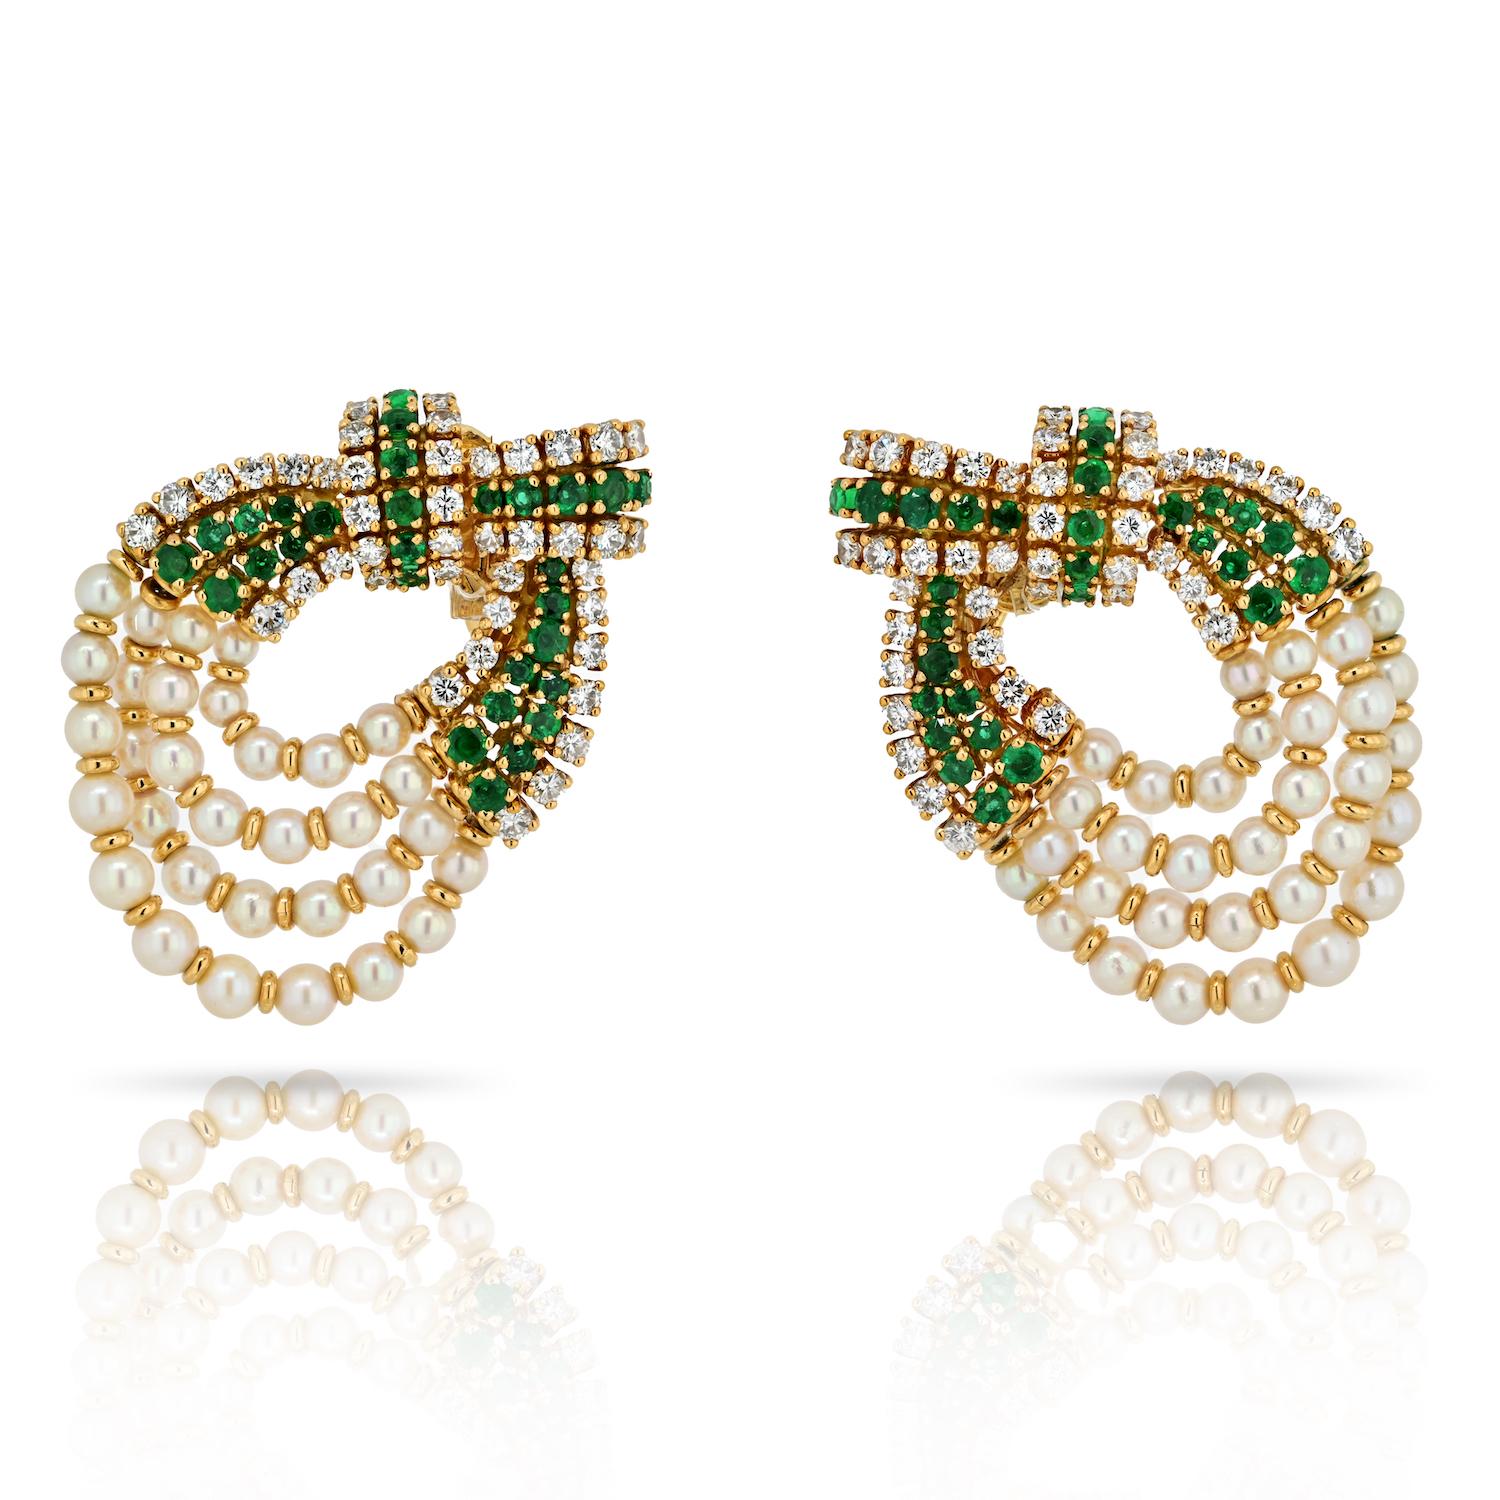 Adorn your ears with unparalleled elegance and sophistication in these Chaumet Platinum & 18K Yellow Gold Diamond, Pearl, and Green Emerald Clip Earrings. The lovely pair of earrings is meticulously designed, matching the Chaumet multi-strand pearl